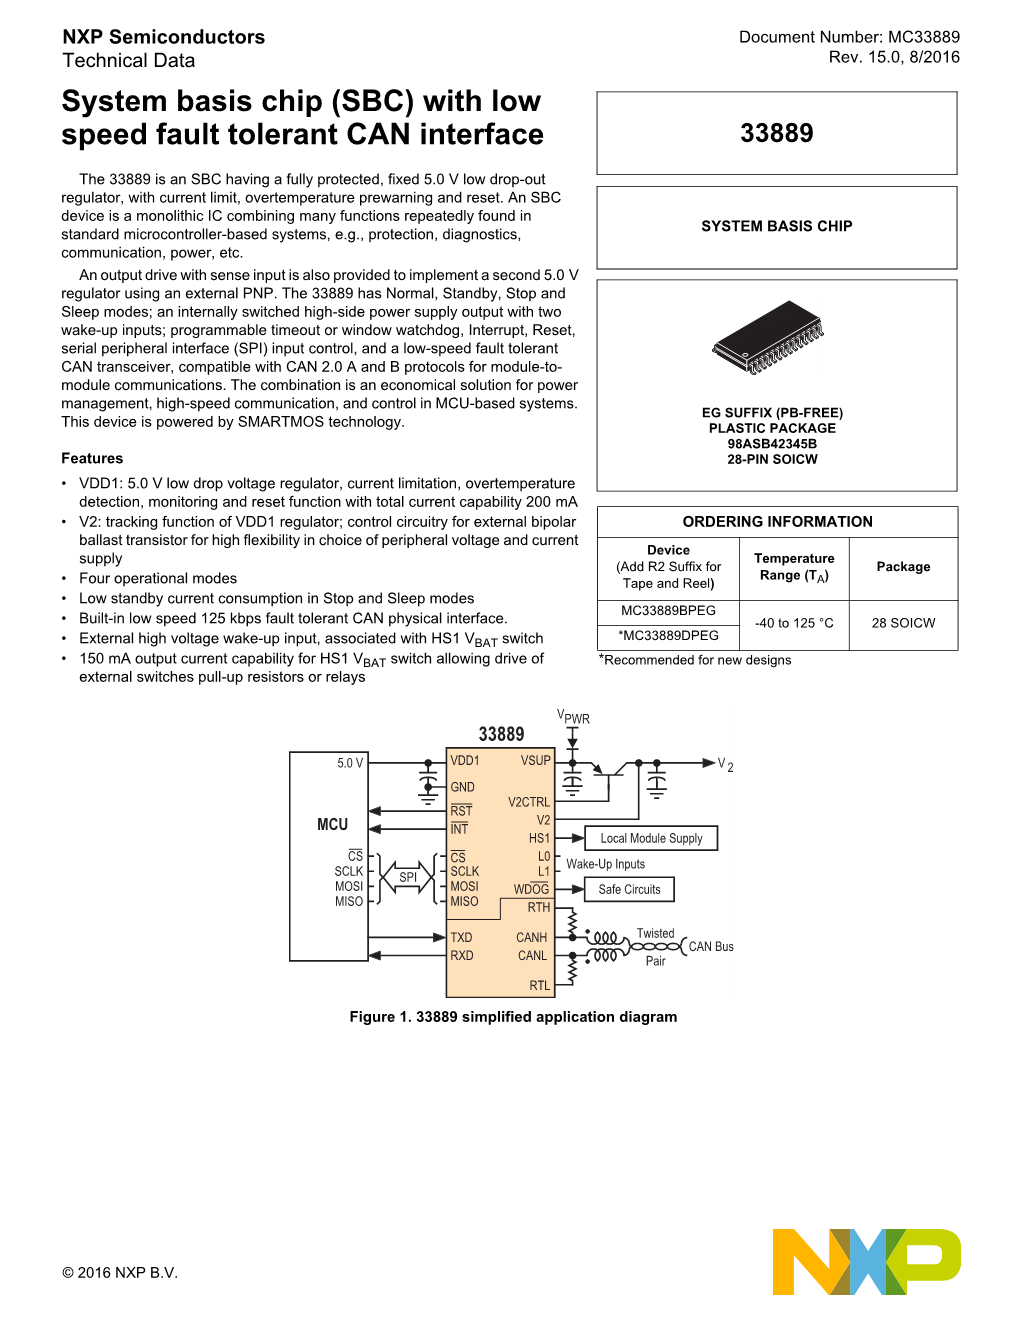 System Basis Chip (SBC) with Low Speed Fault Tolerant CAN Interface 33889